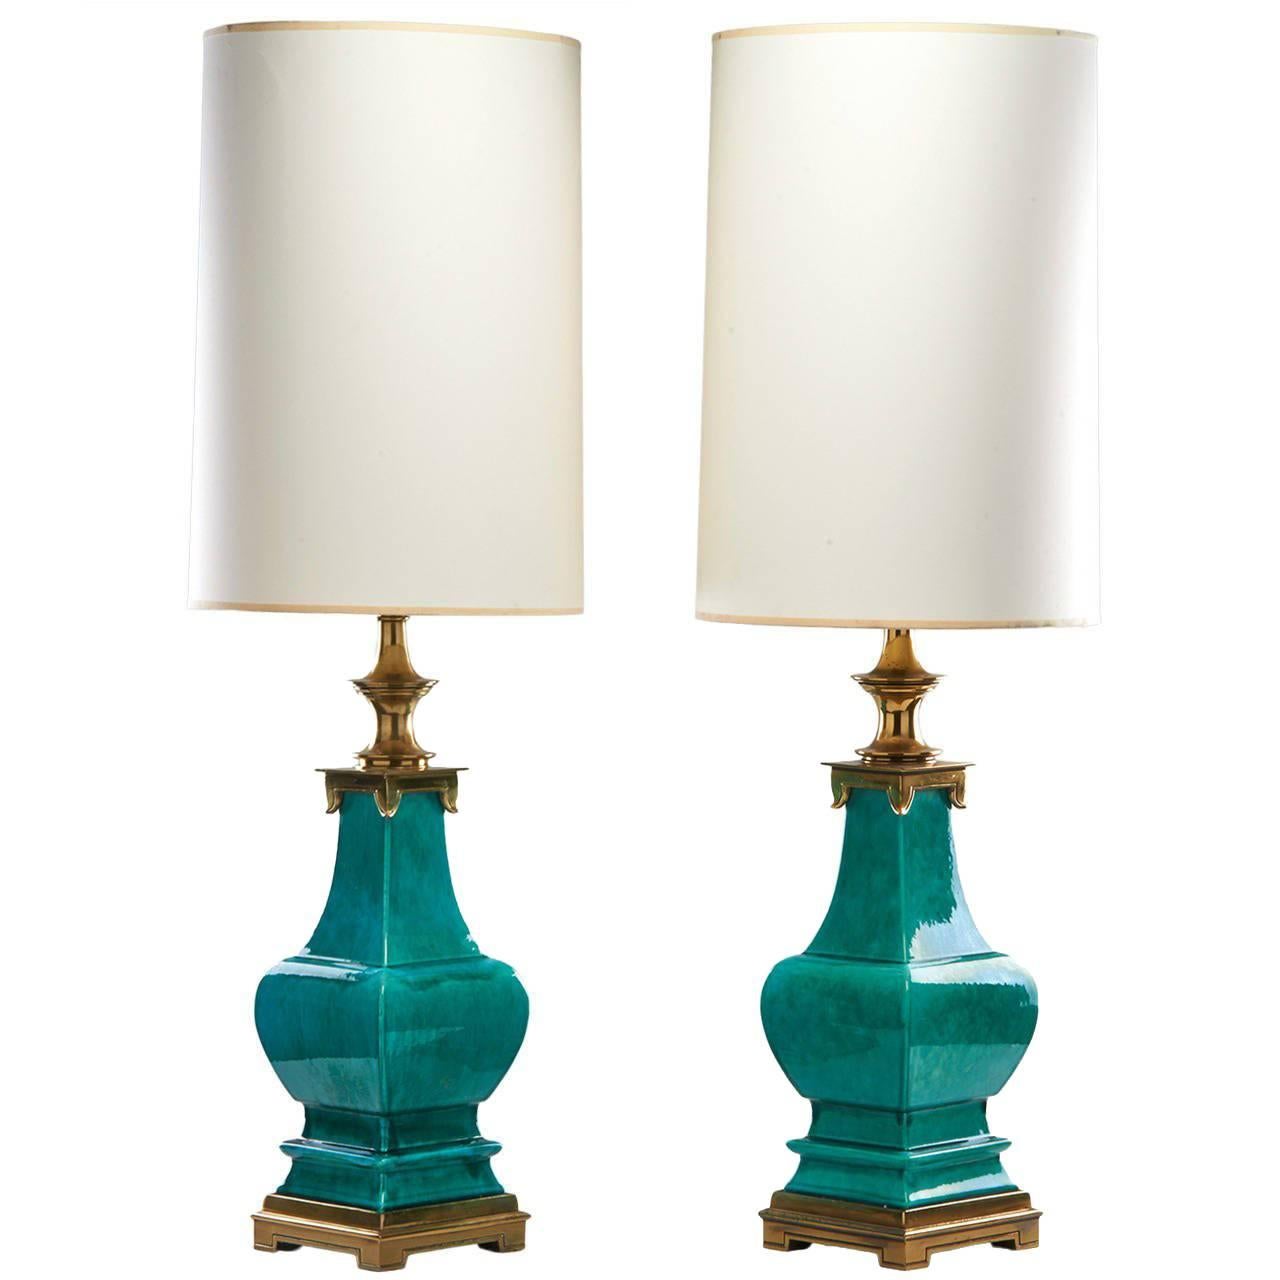 Pair of Stiffel Table Lamps, 1950